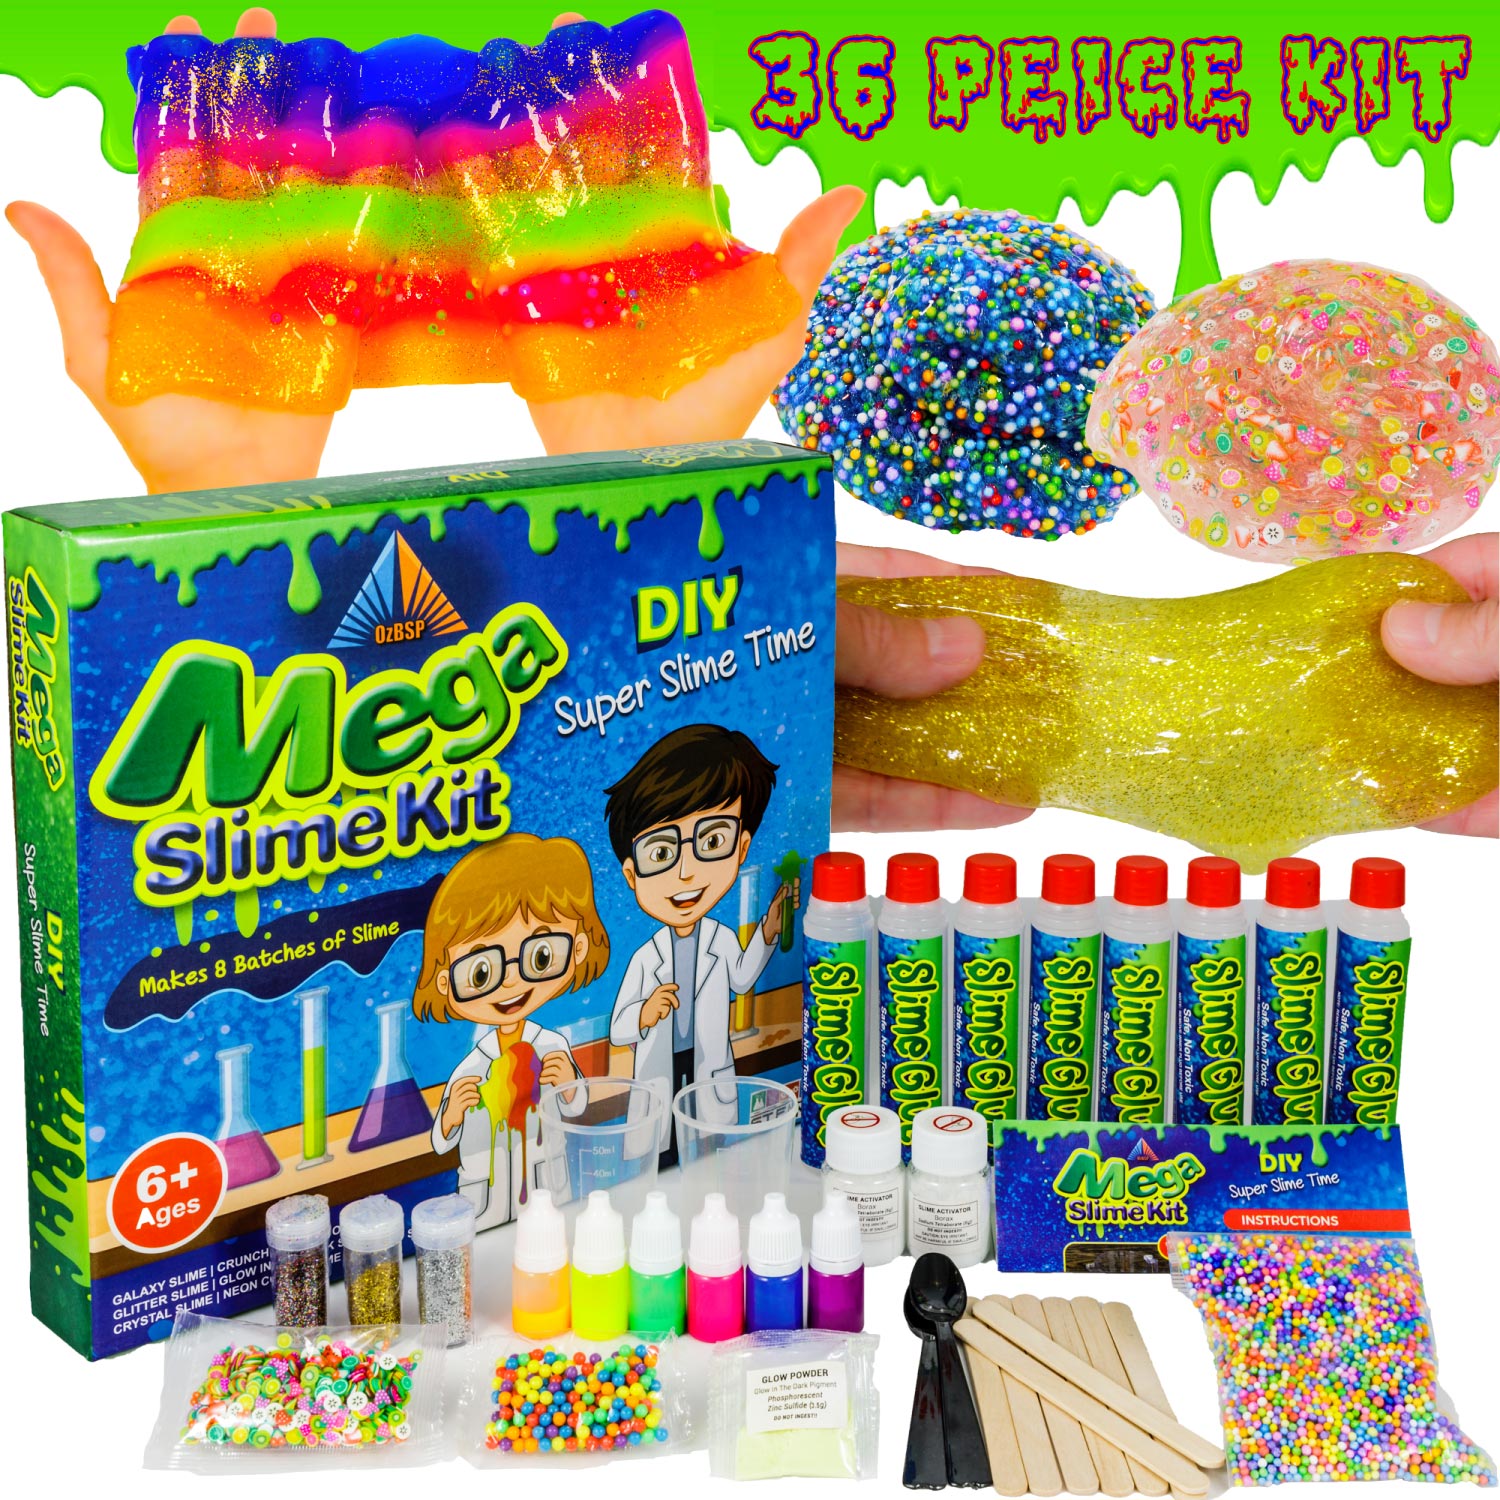 OzBSP Everything to Make DIY Slime Kit with Glue and Borax